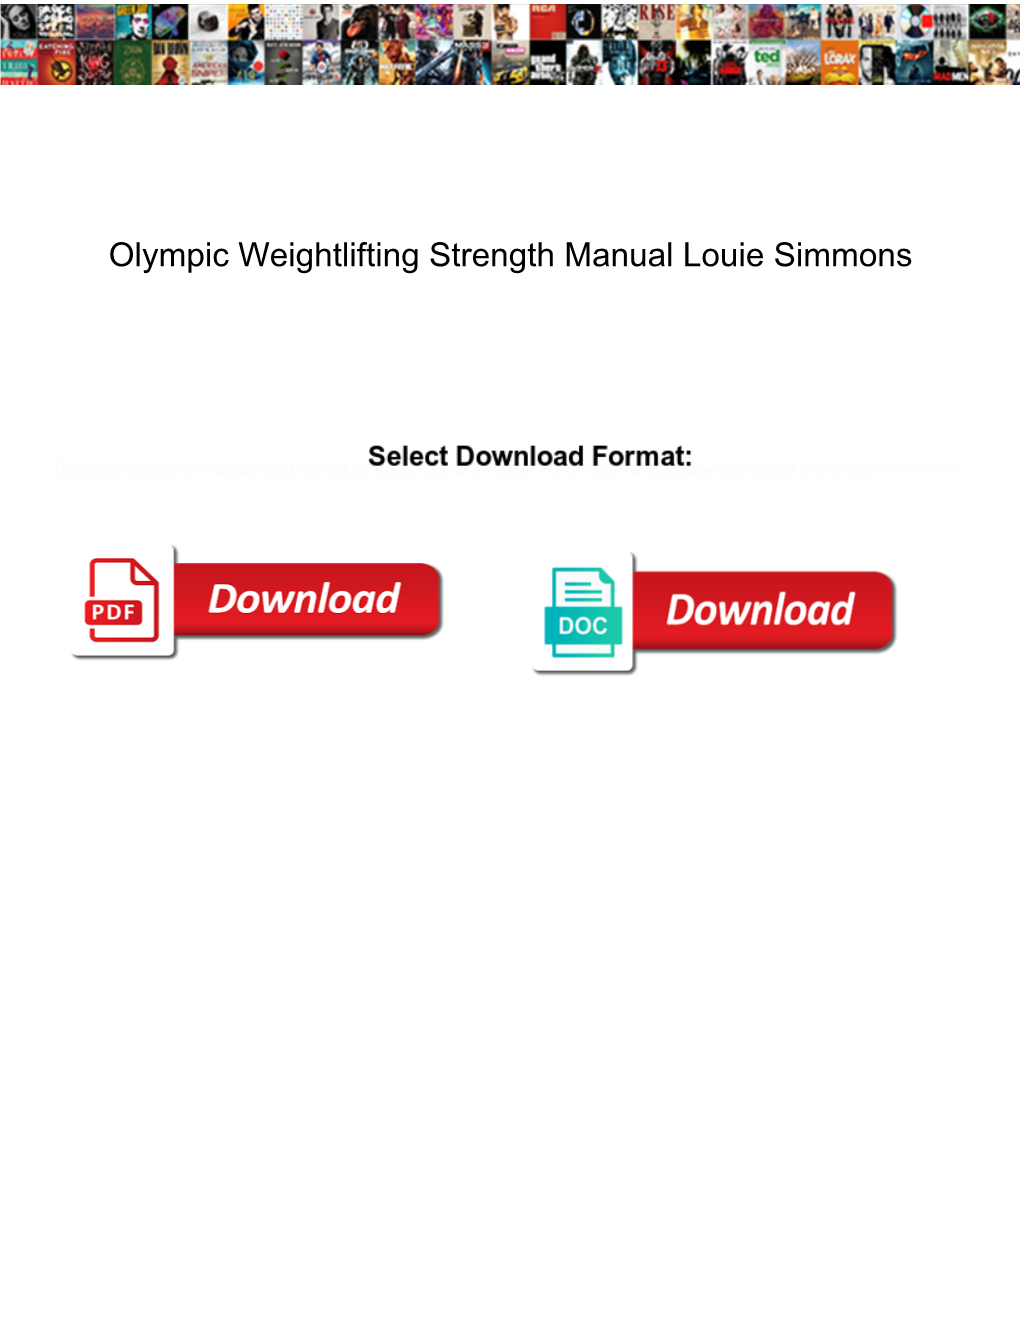 Olympic Weightlifting Strength Manual Louie Simmons